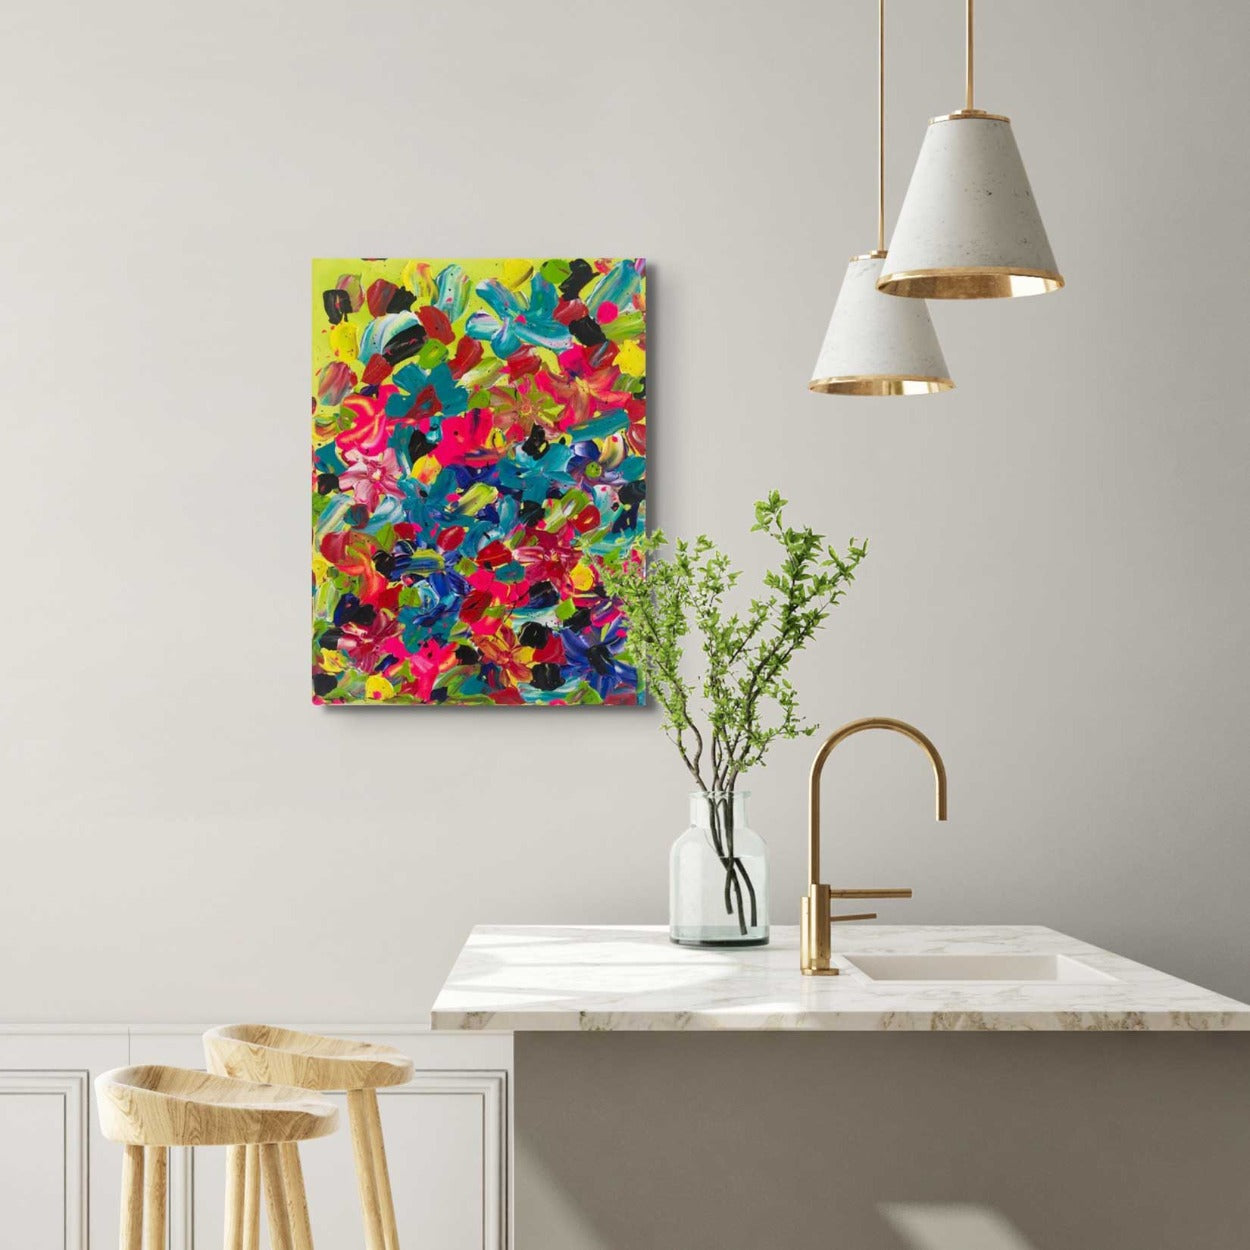 Summer Garden, original canvas painting seen hanging in kitchen setting. Bold, abstract expressionism art by Bridget Bradley